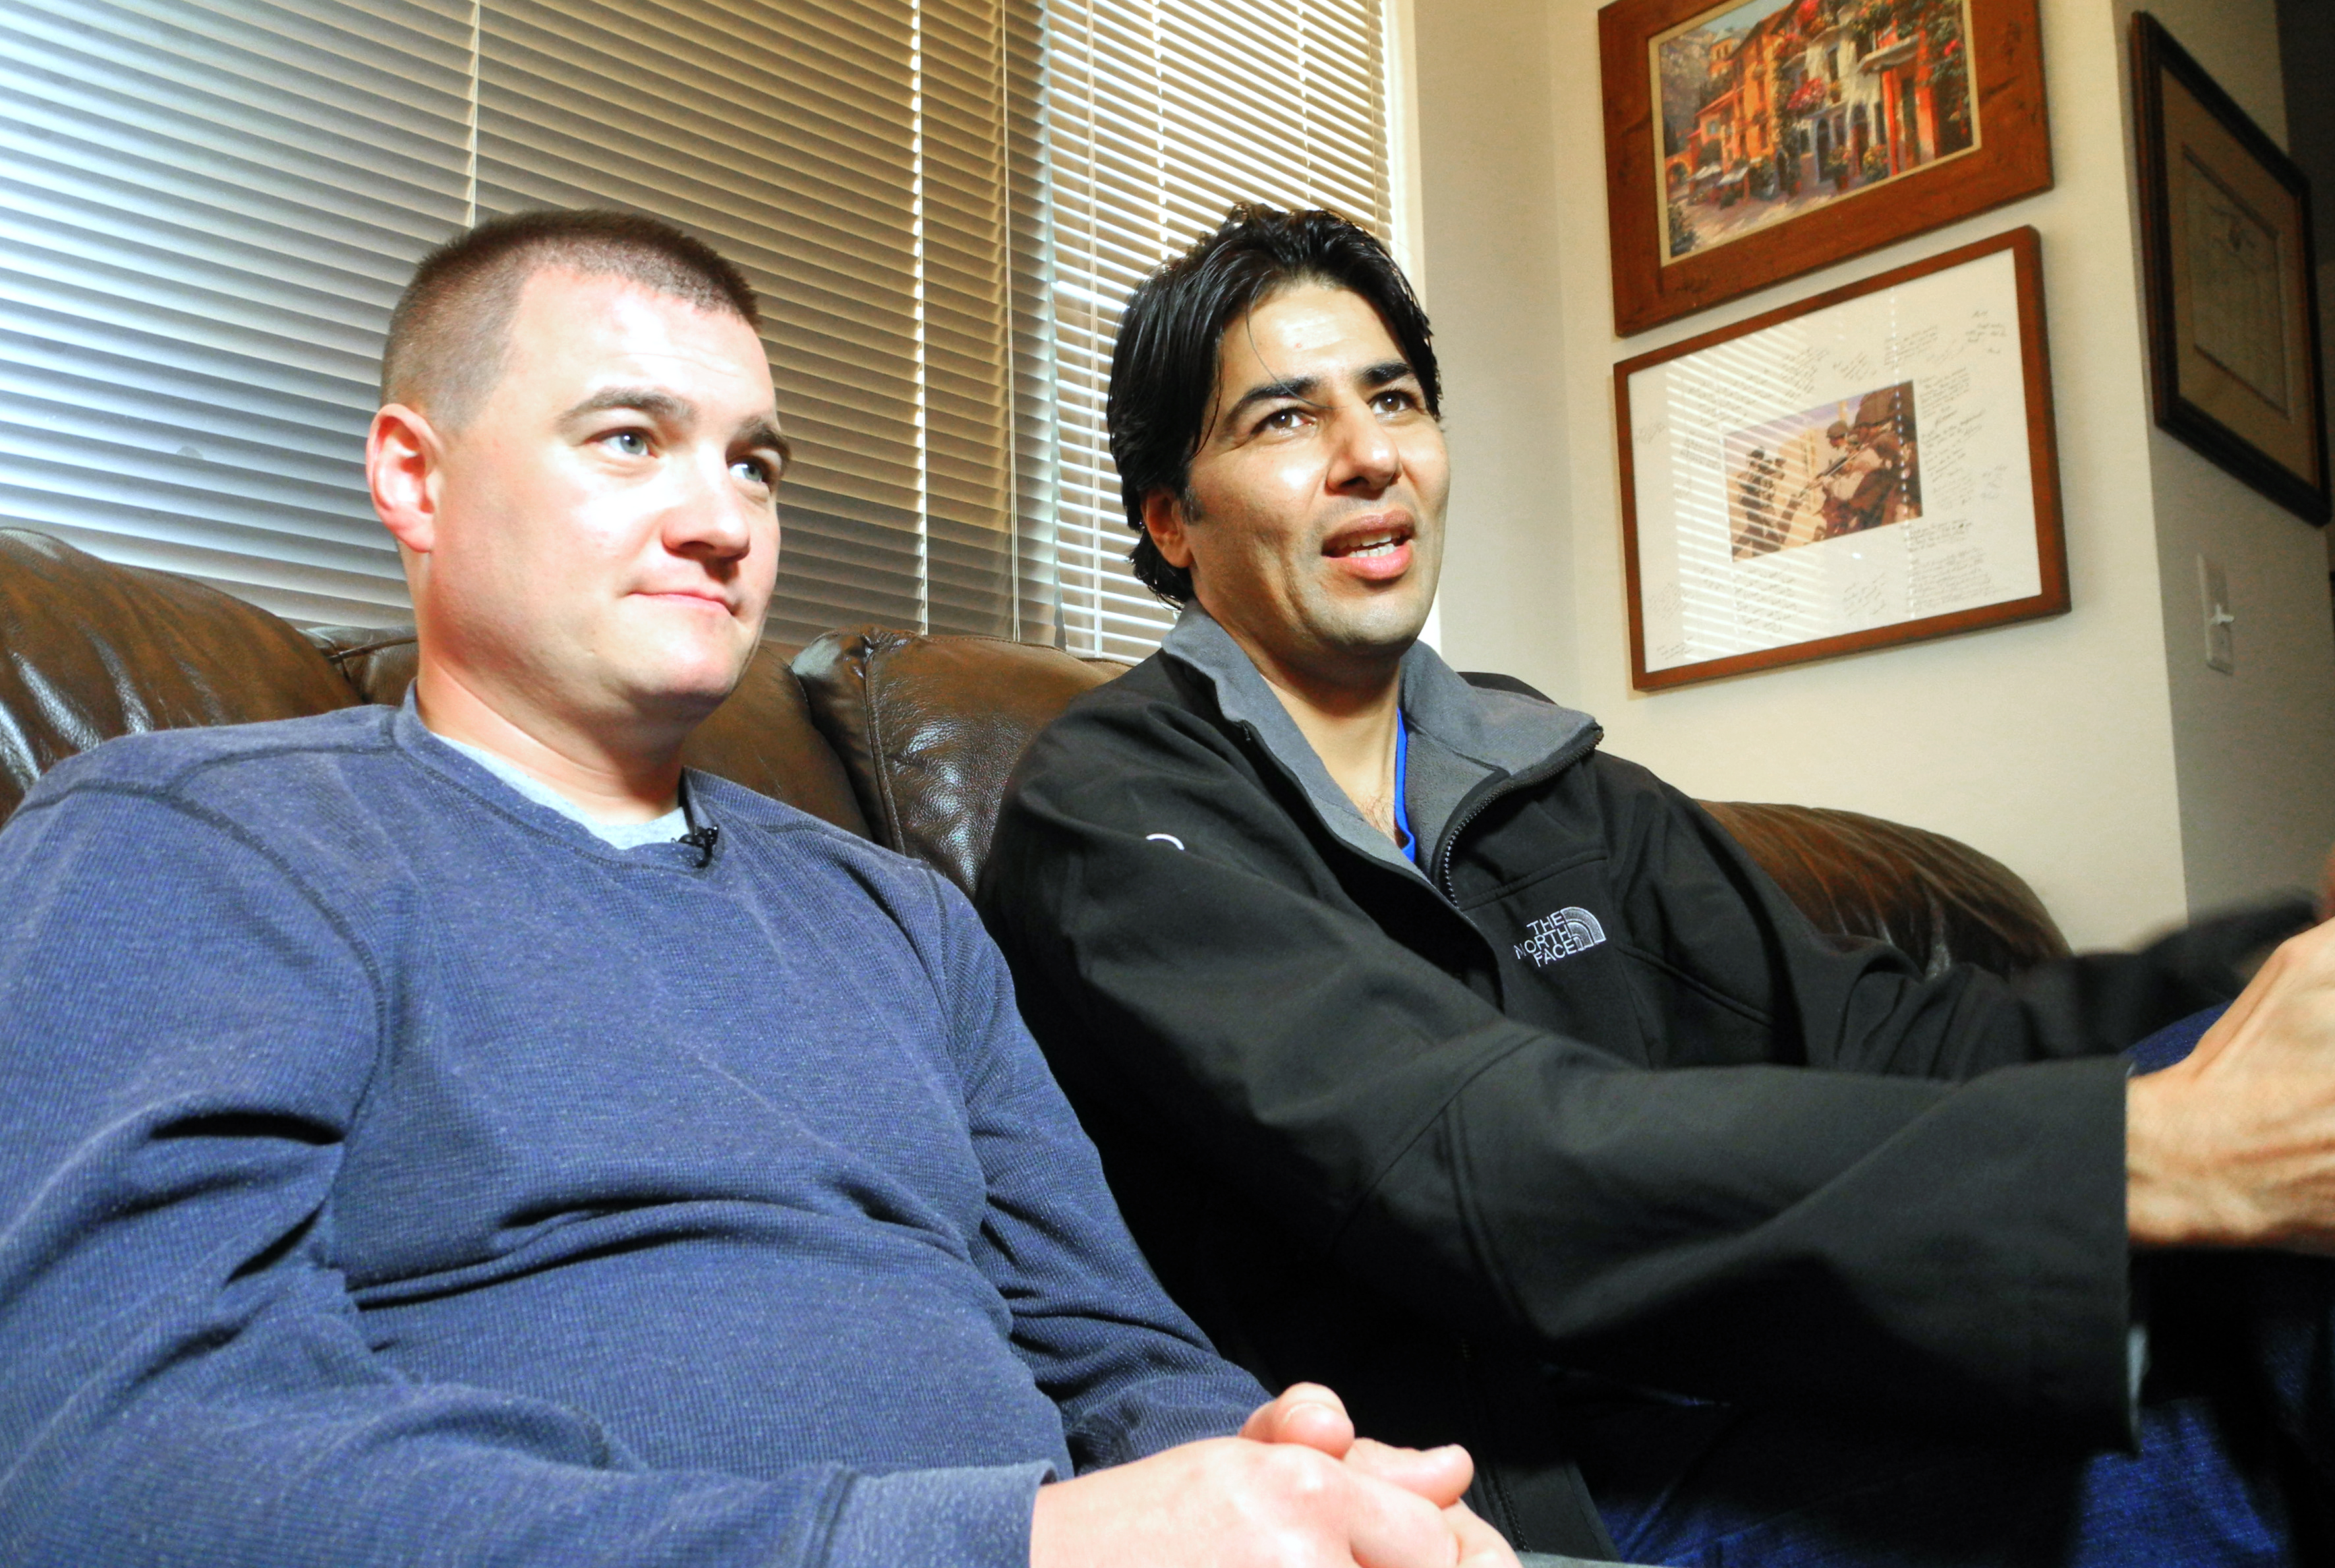 U.S. Army Captain Matt Zeller (L) with translator Janis Shenwari, whom he credits for saving his life in a firefight in Afghanistan in November 2008, and who, after 5 years of struggle, is one of the lucky few who was able to take advantage of the special Visa program for Afghanistan interpreters.(Guillaume Meyer/AFP/Getty Images)